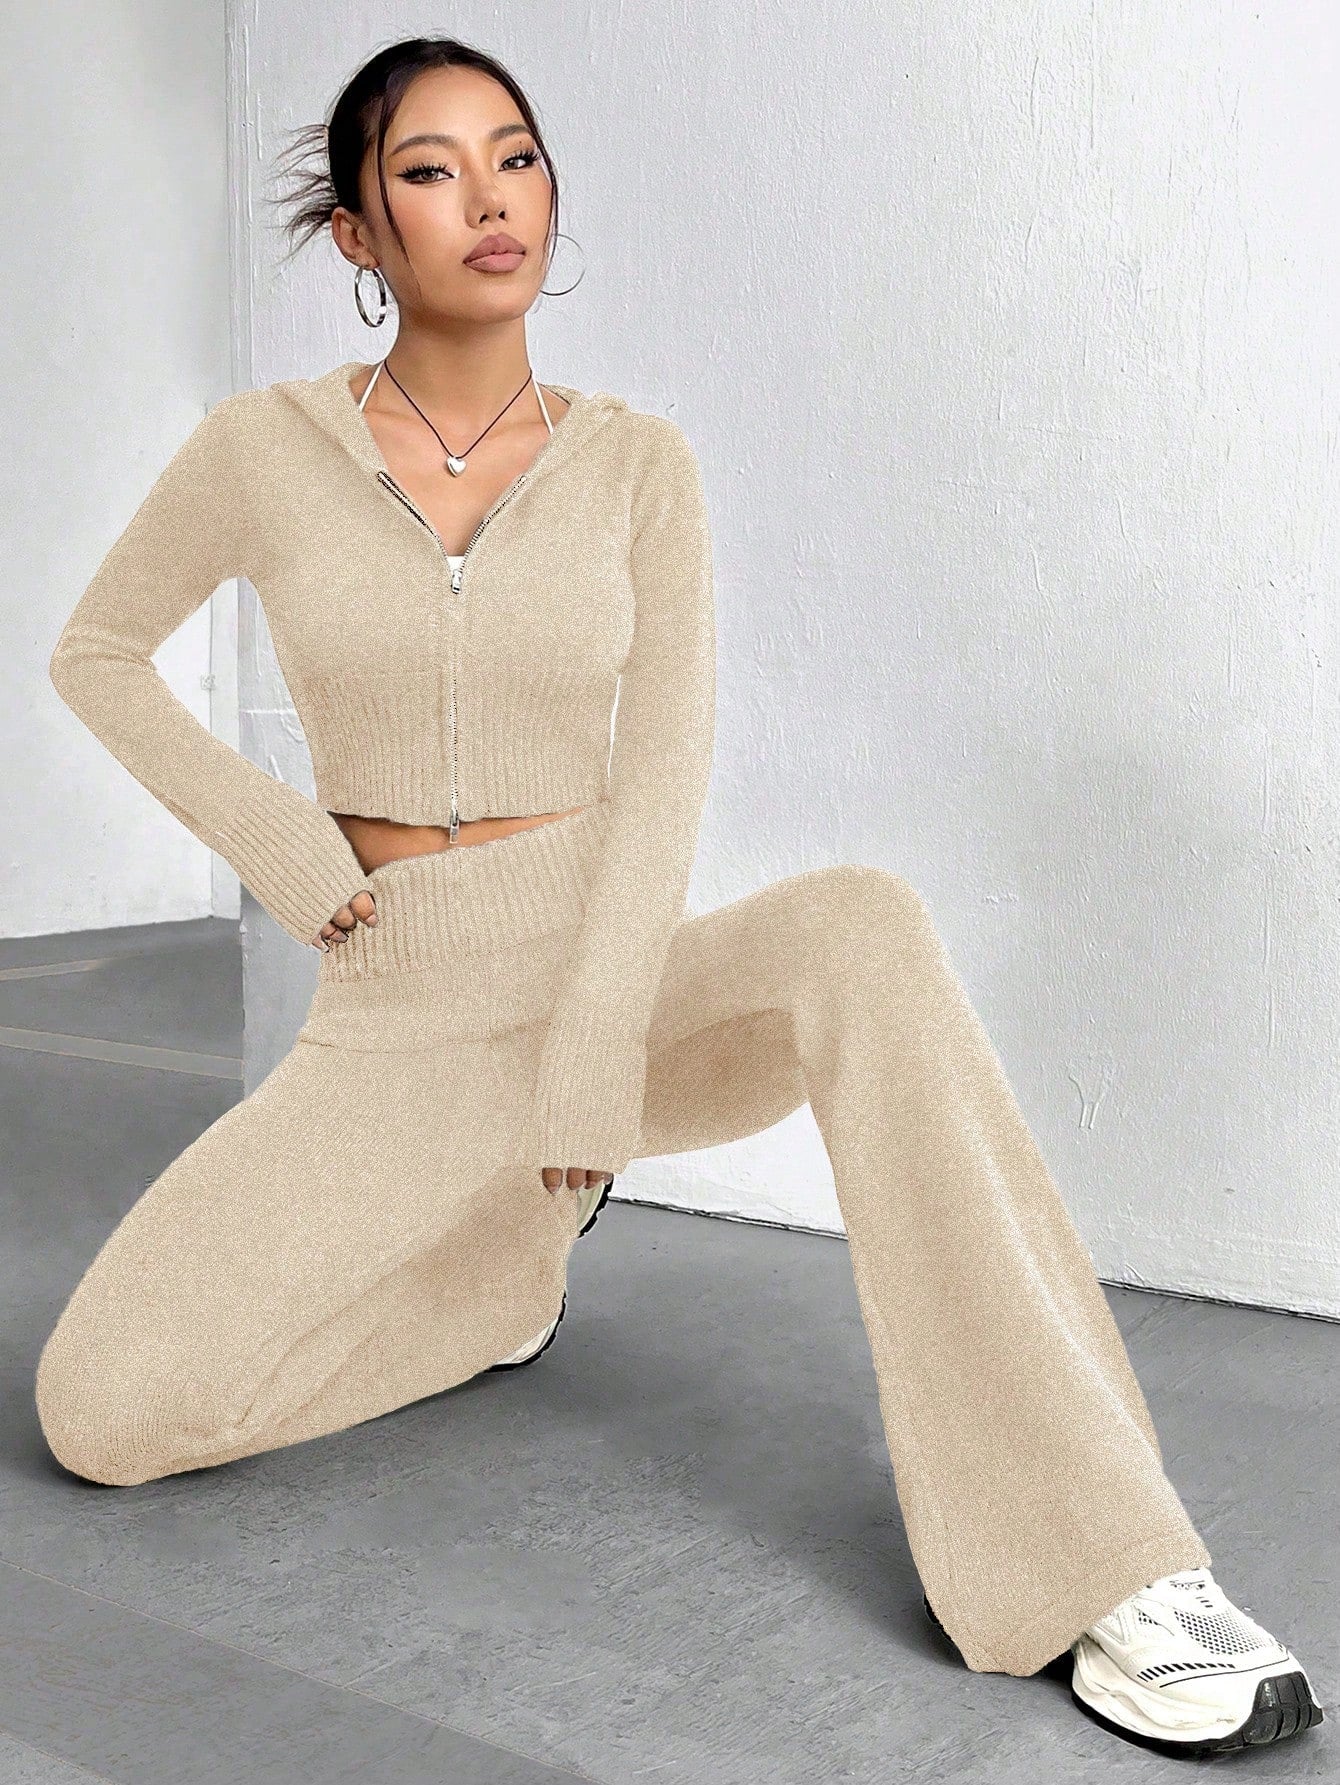 Women's Solid Colored Hooded Zipper Sweater And Pants Set